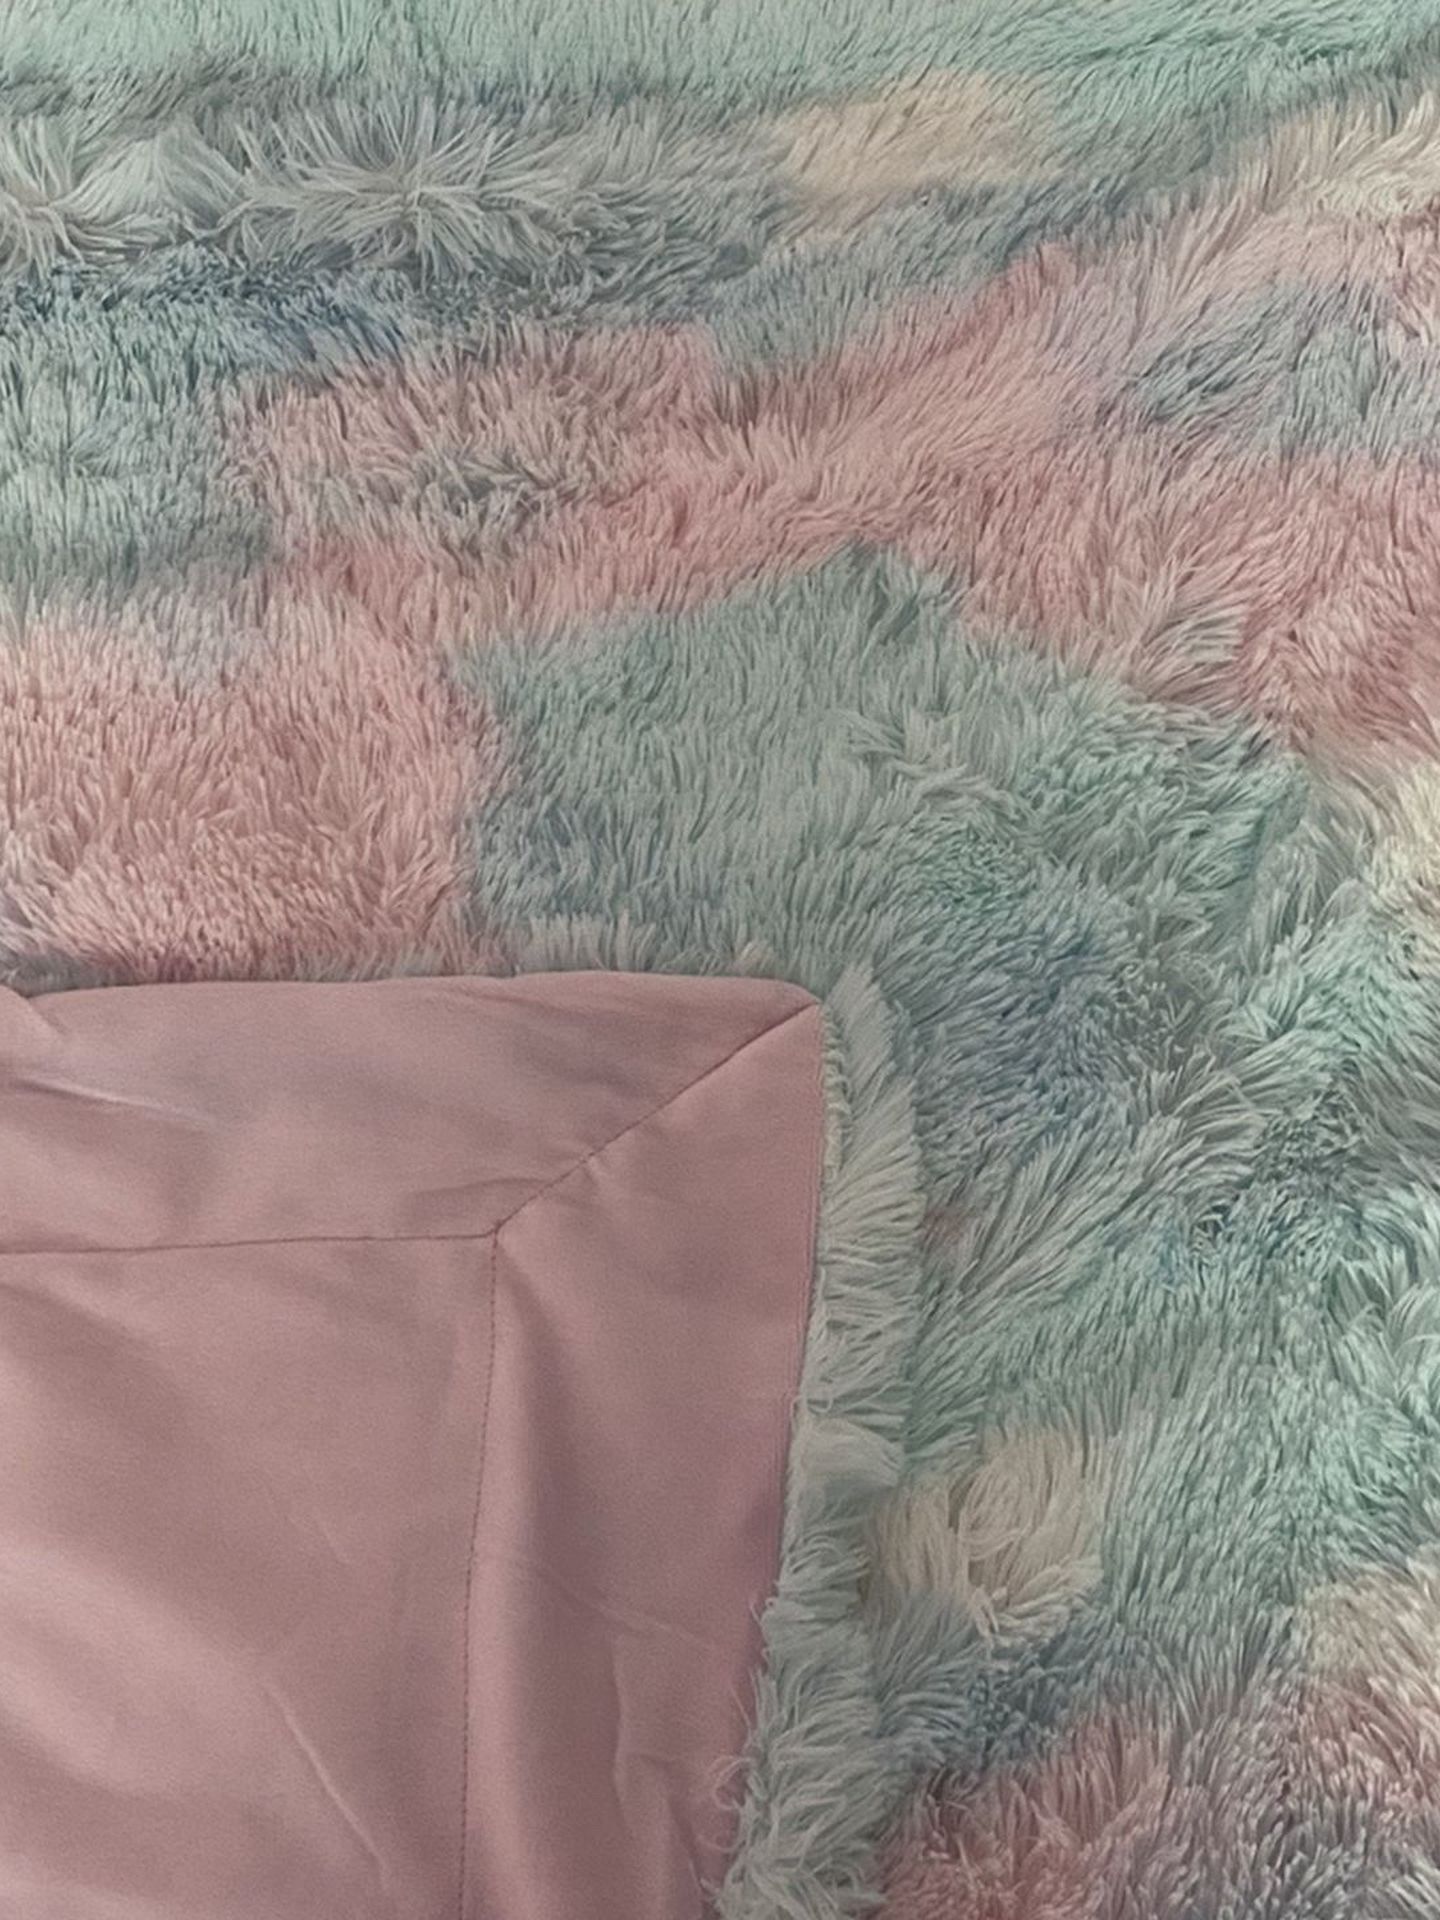 50 X 64 “ Pink And Blue Throw Blanket